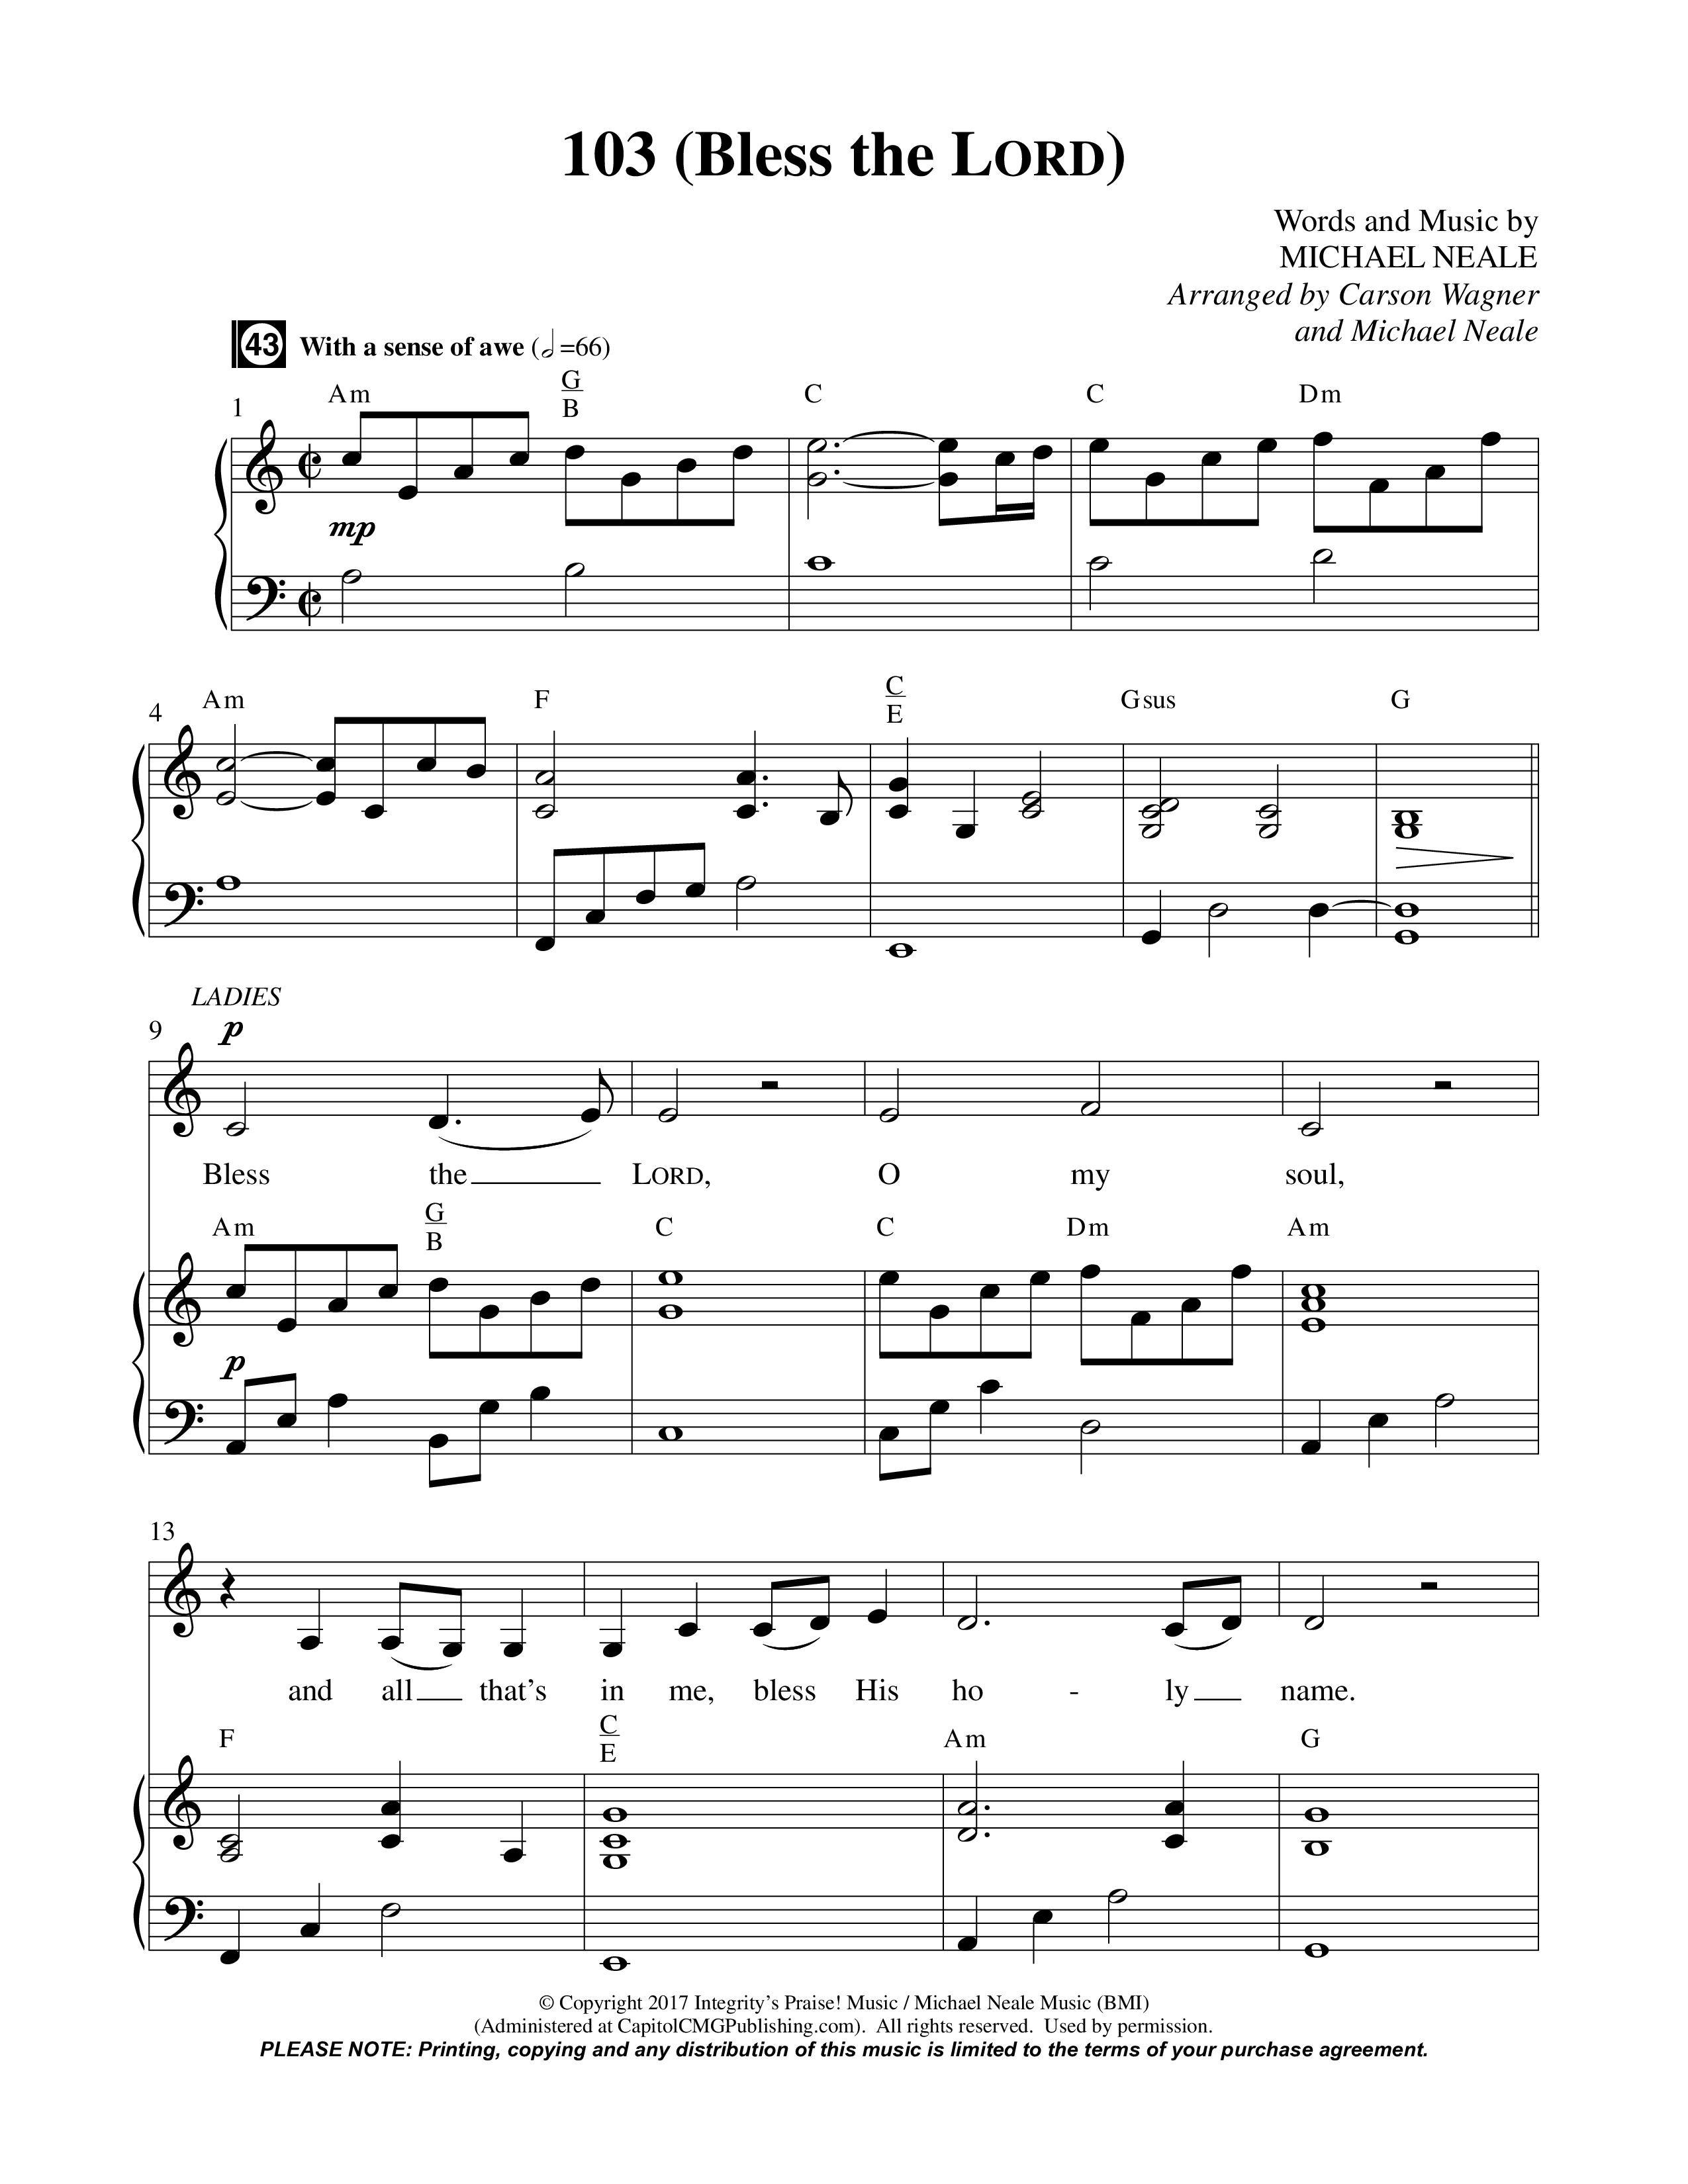 103 (Bless The Lord) (Choral Anthem SATB) Choral Vocal Parts (Prestonwood Worship / Prestonwood Choir / Arr. Michael Neale / Orch. Carson Wagner)